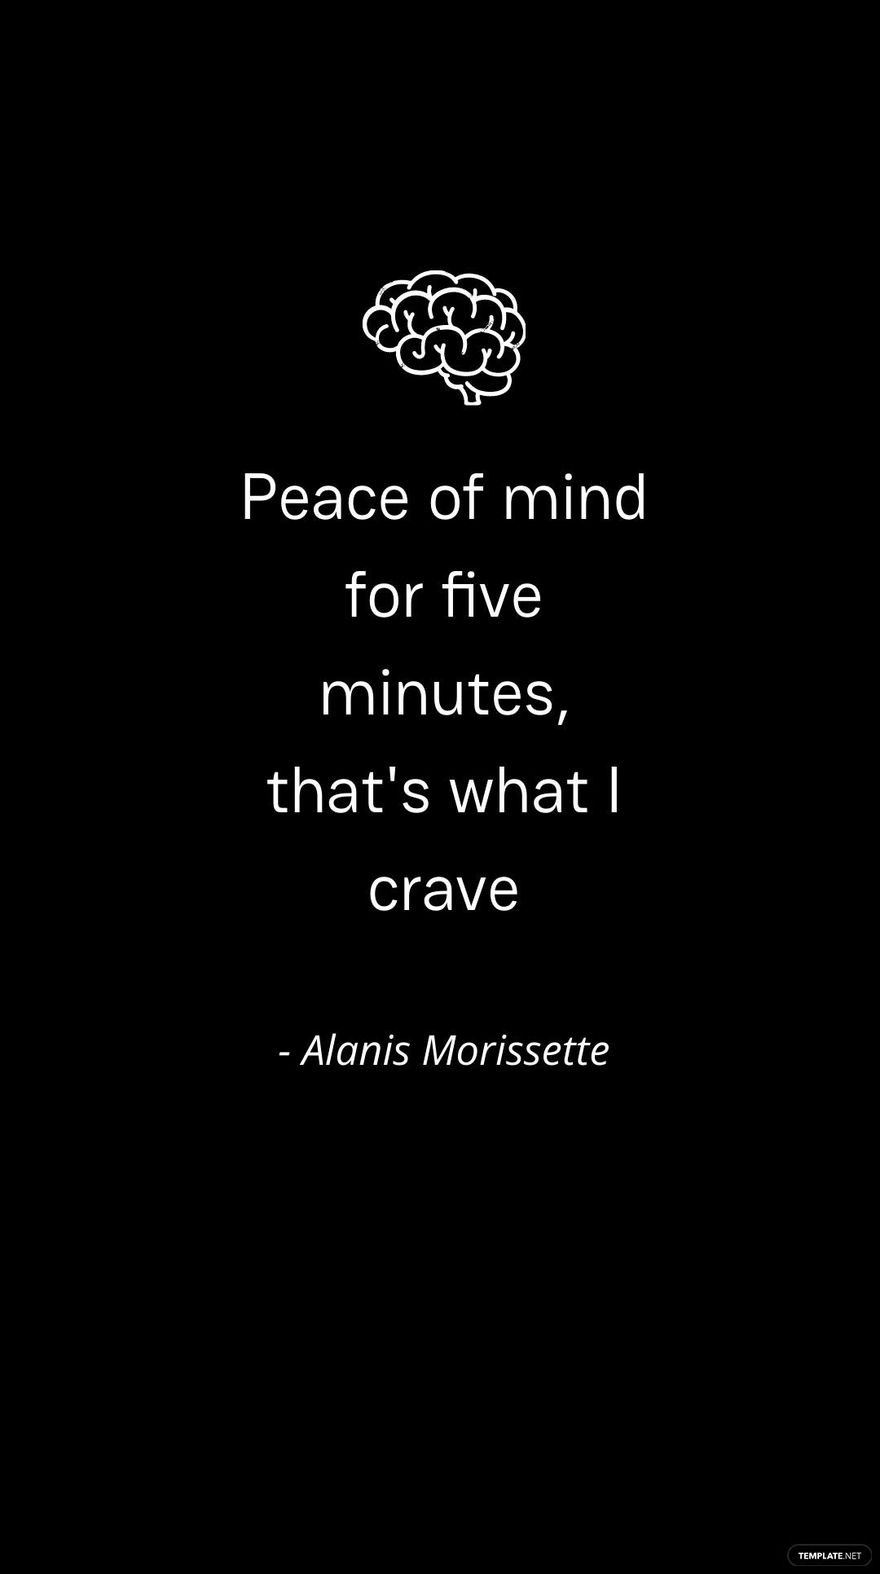 Free Alanis Morissette - Peace of mind for five minutes, that's what I crave in JPG